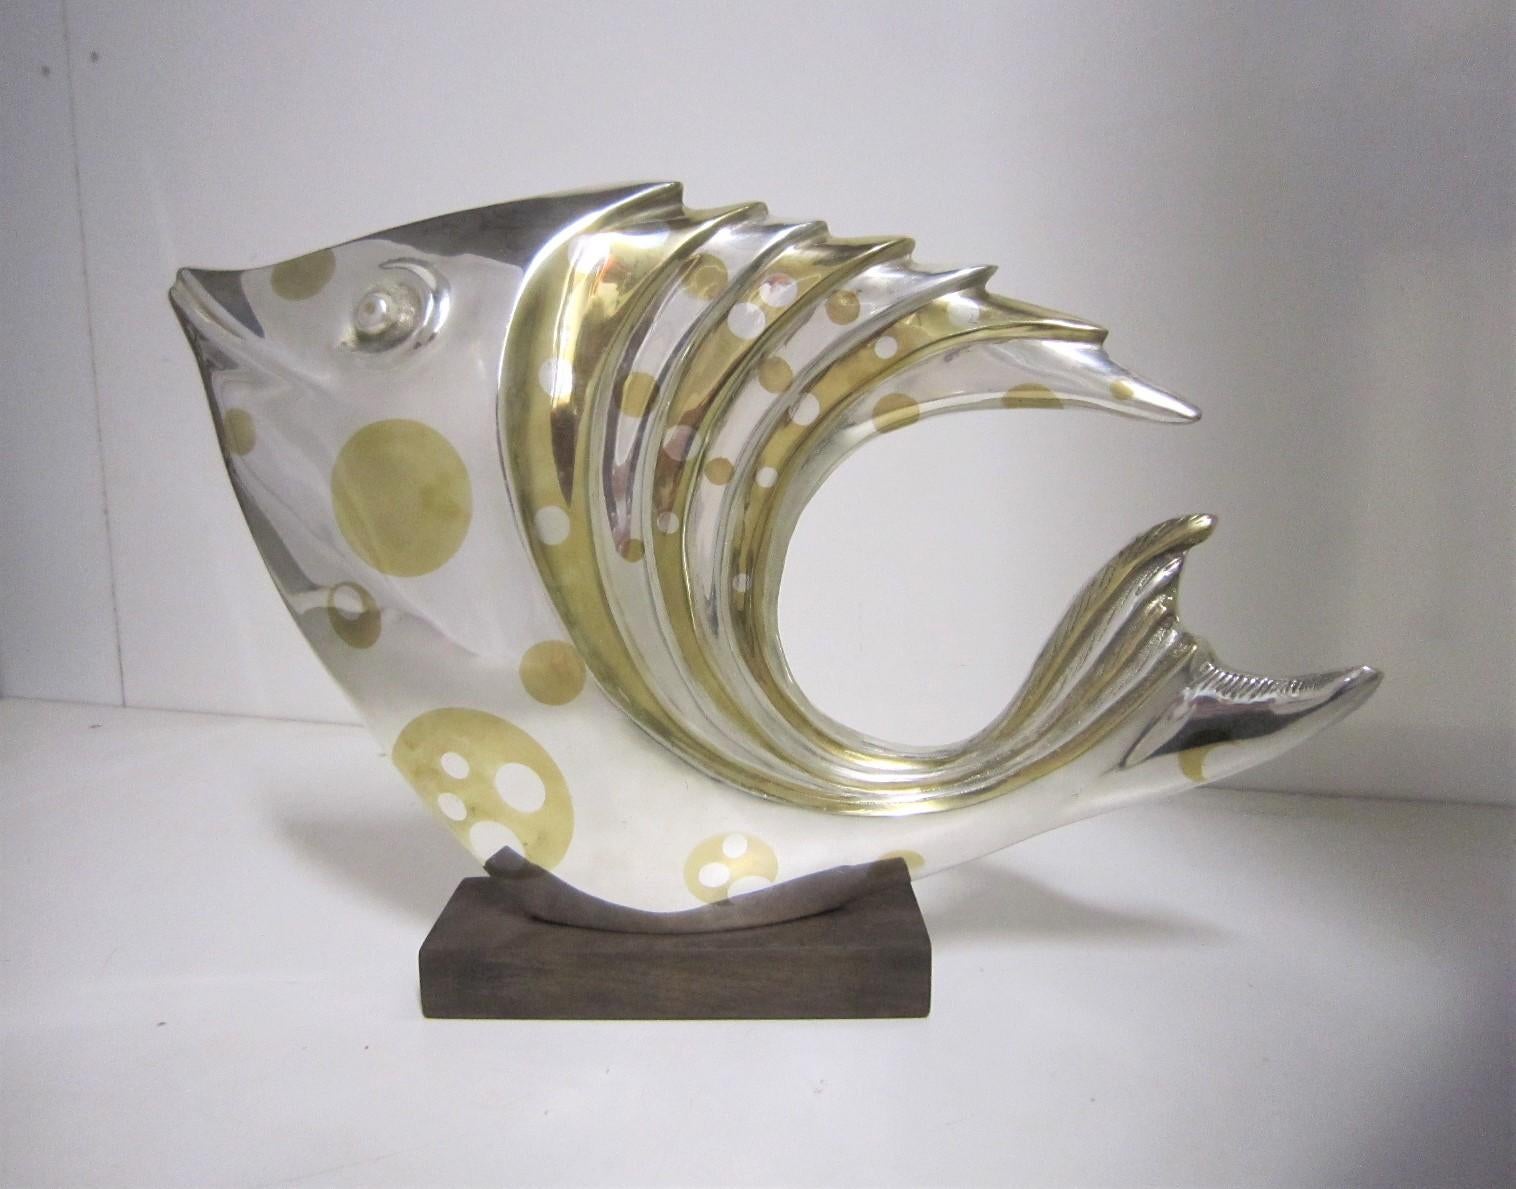 A large and impressive silver and parcel-gilt bronze fish attributed to Marie Louise Simard.
This elegant Fine Art sculpture of a stylized exotic fish, similar to a discus fish, moon fish or silver spiny fish floats effortlessly on it's base and